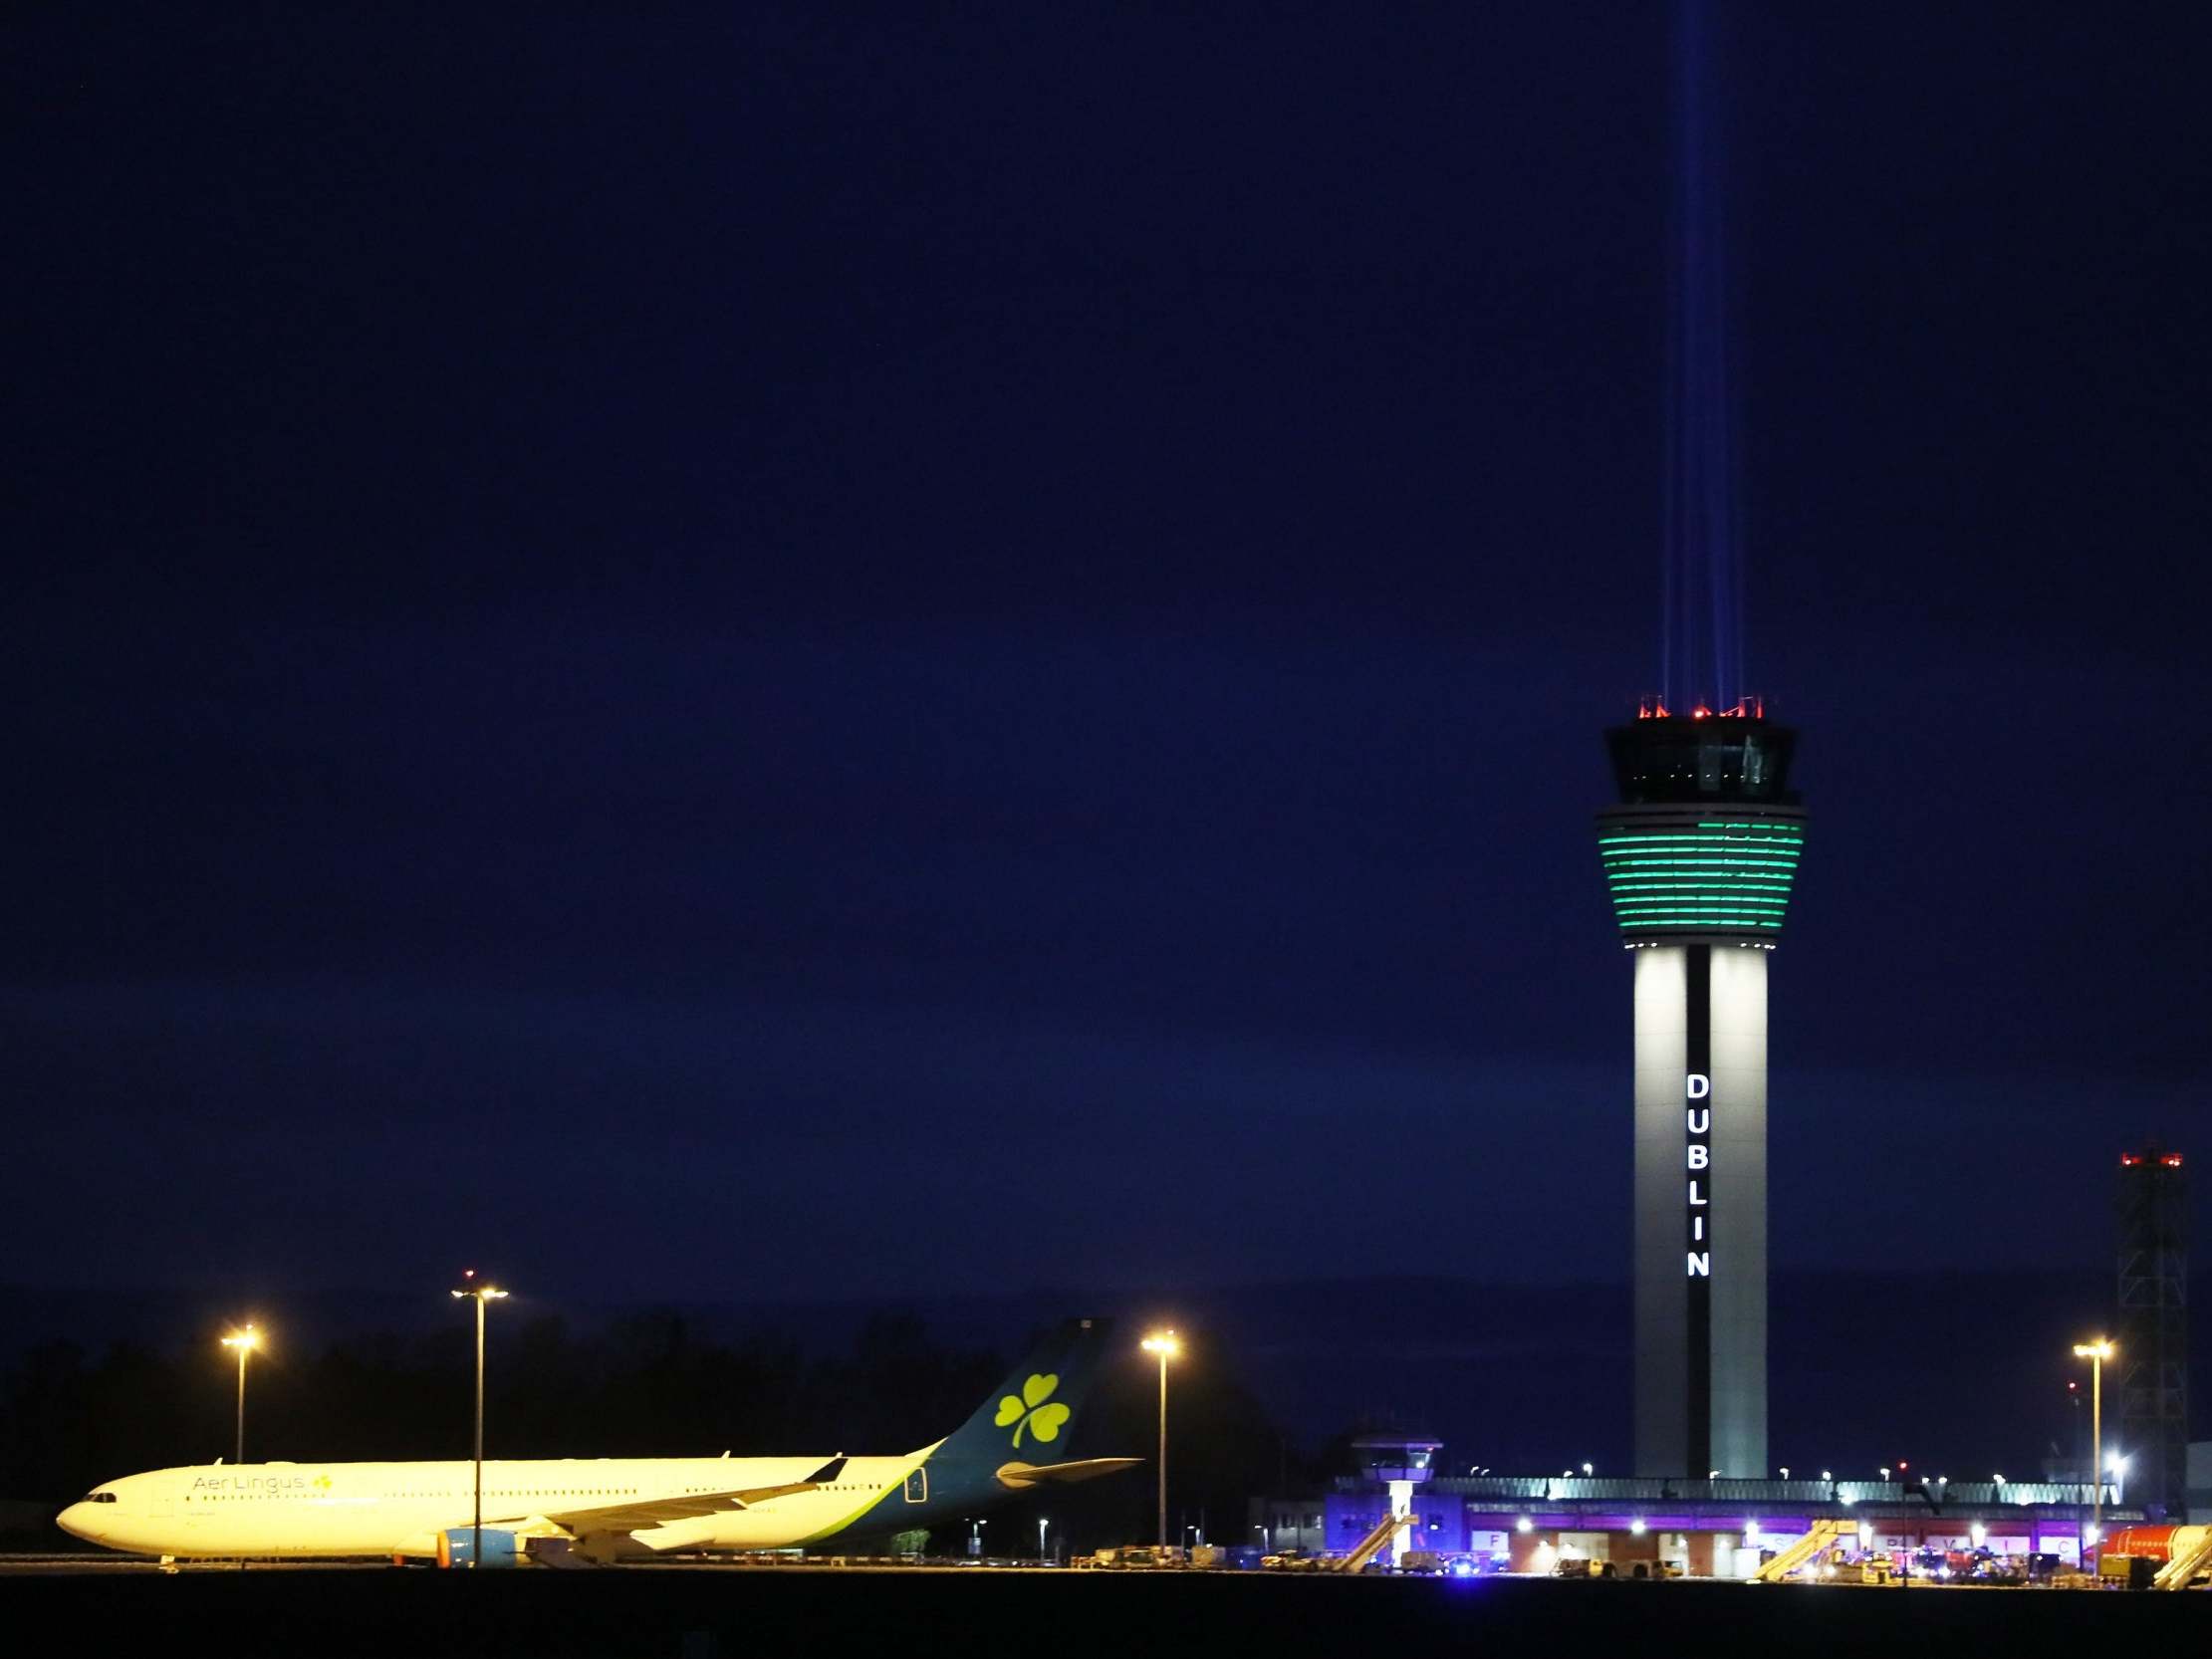 Dublin Airport shines a large beam in tribute to front line health workers. The airport's Twitter account poked fun at Boris Johnson's top advisor, who said he took a 30-minute drive while under lockdown to test his eyesight